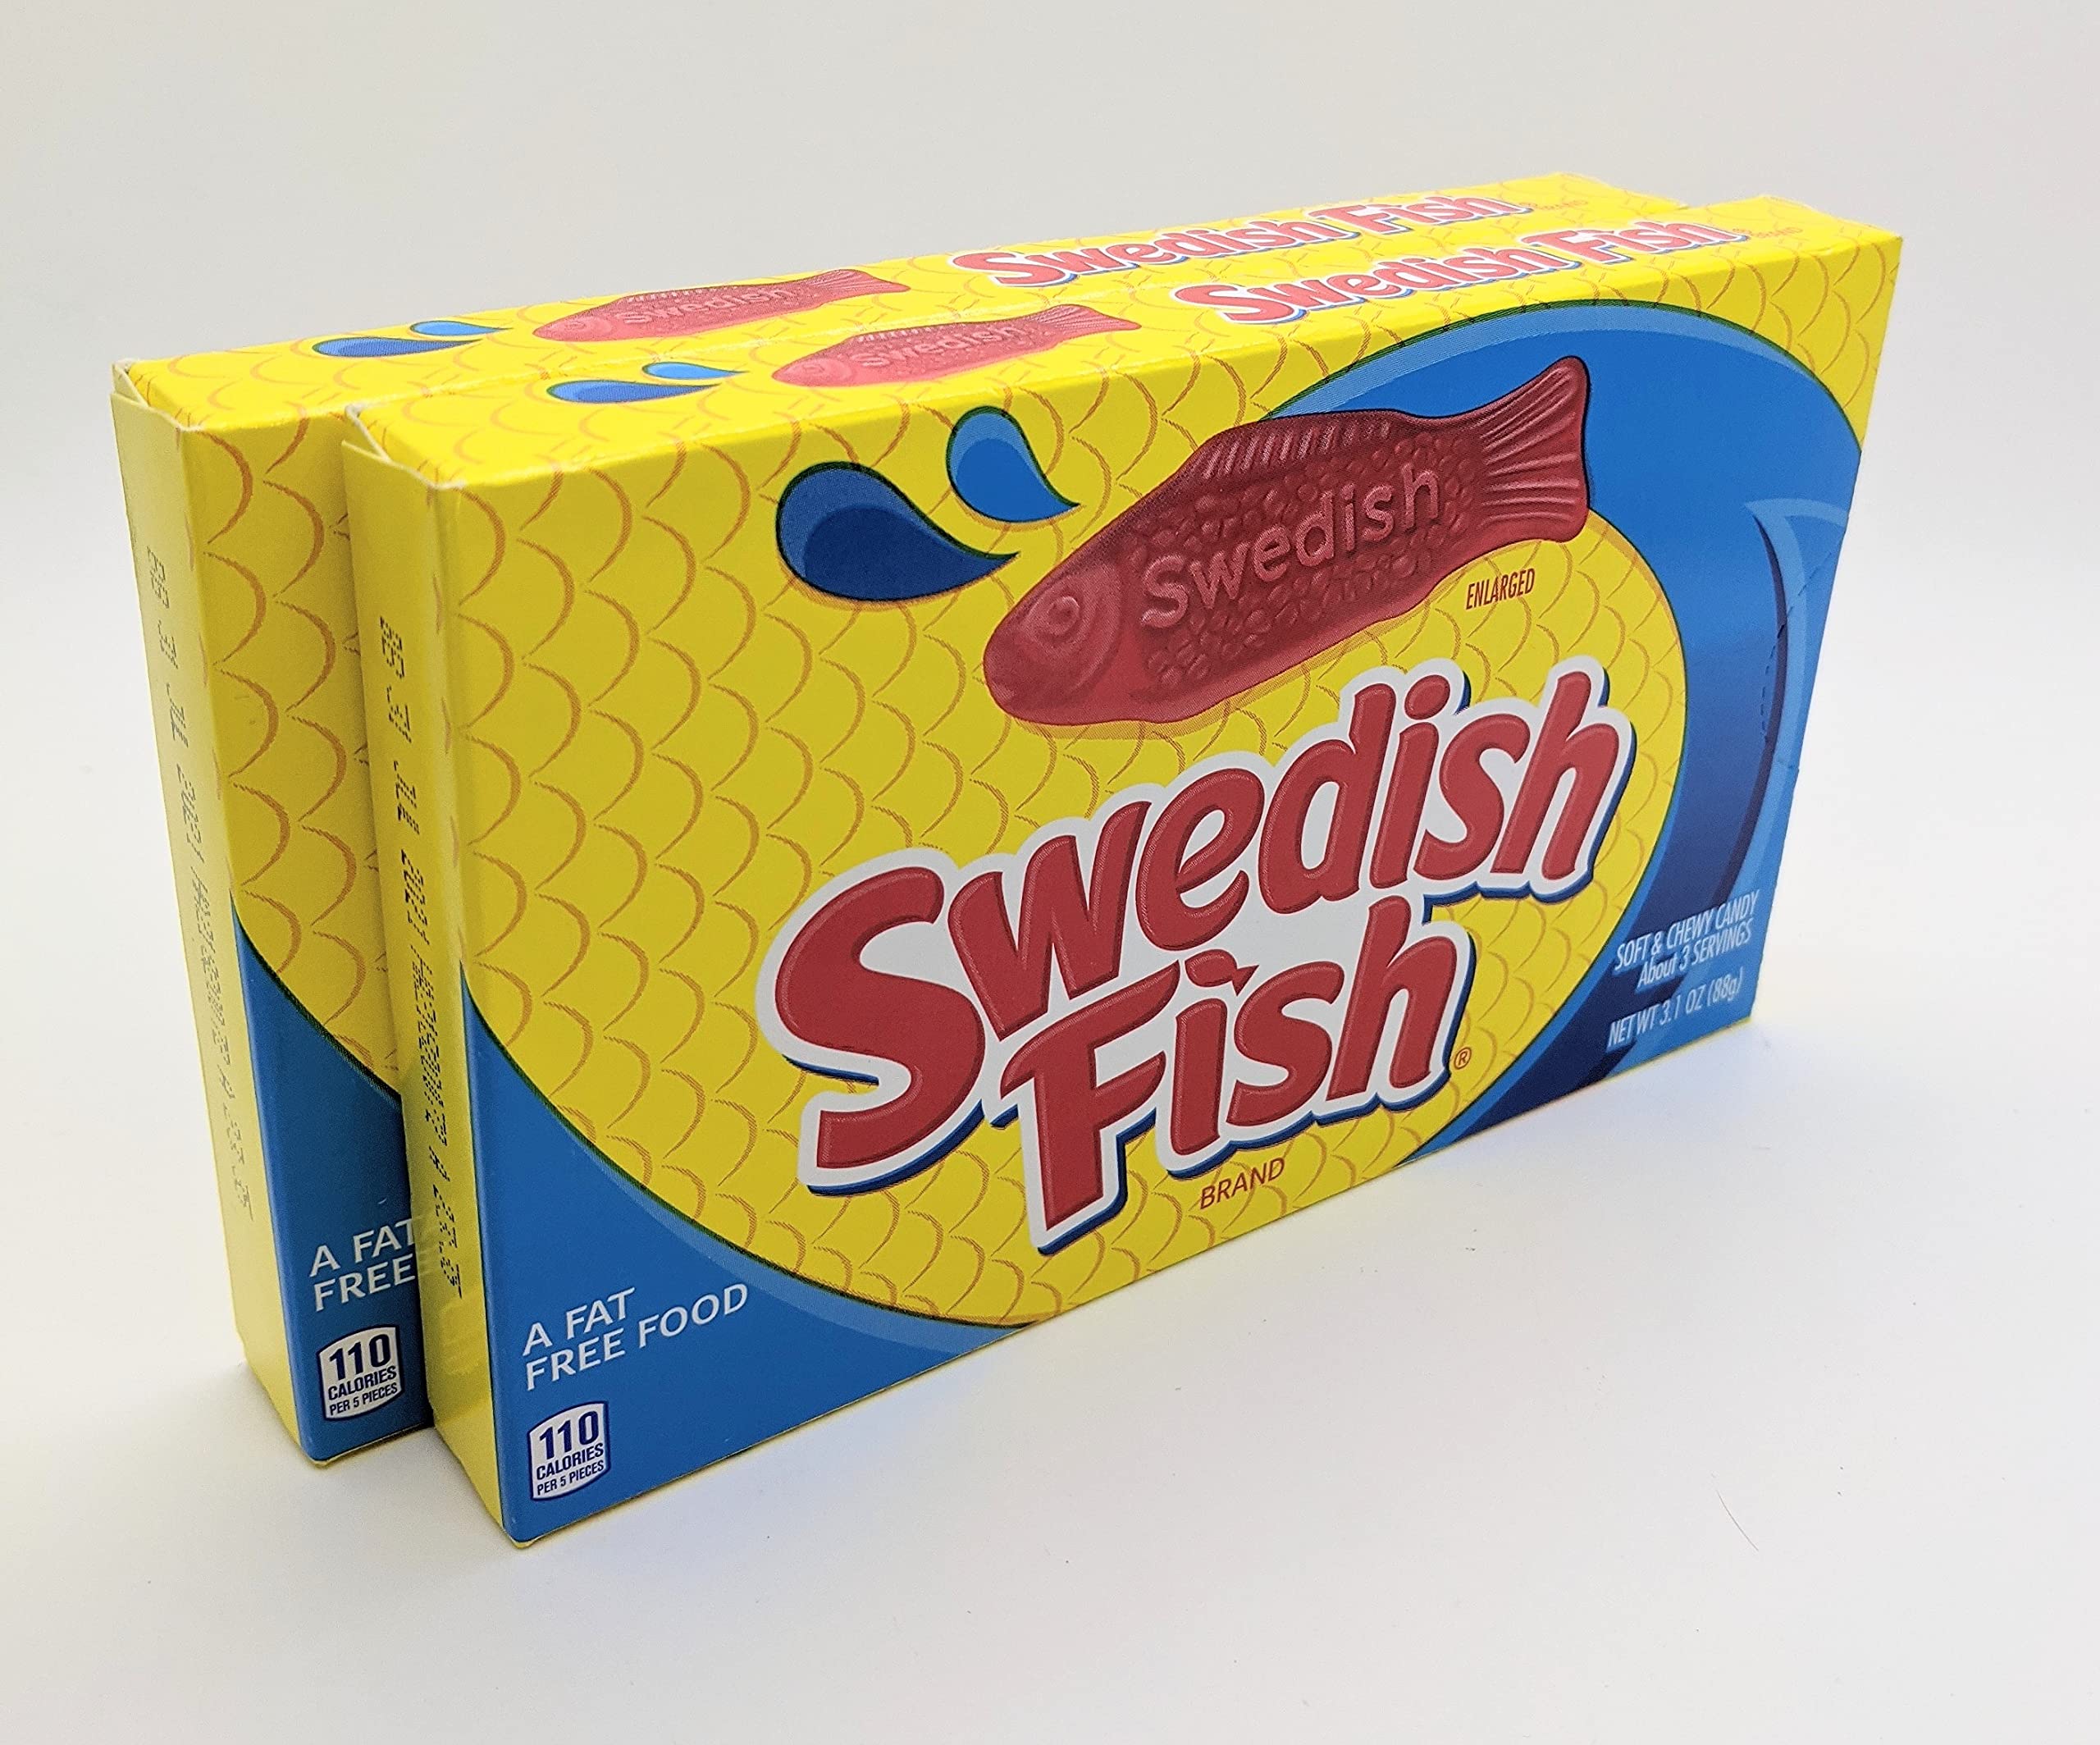 Swedish Fish Soft and Chewy Candy - 3.1 oz box